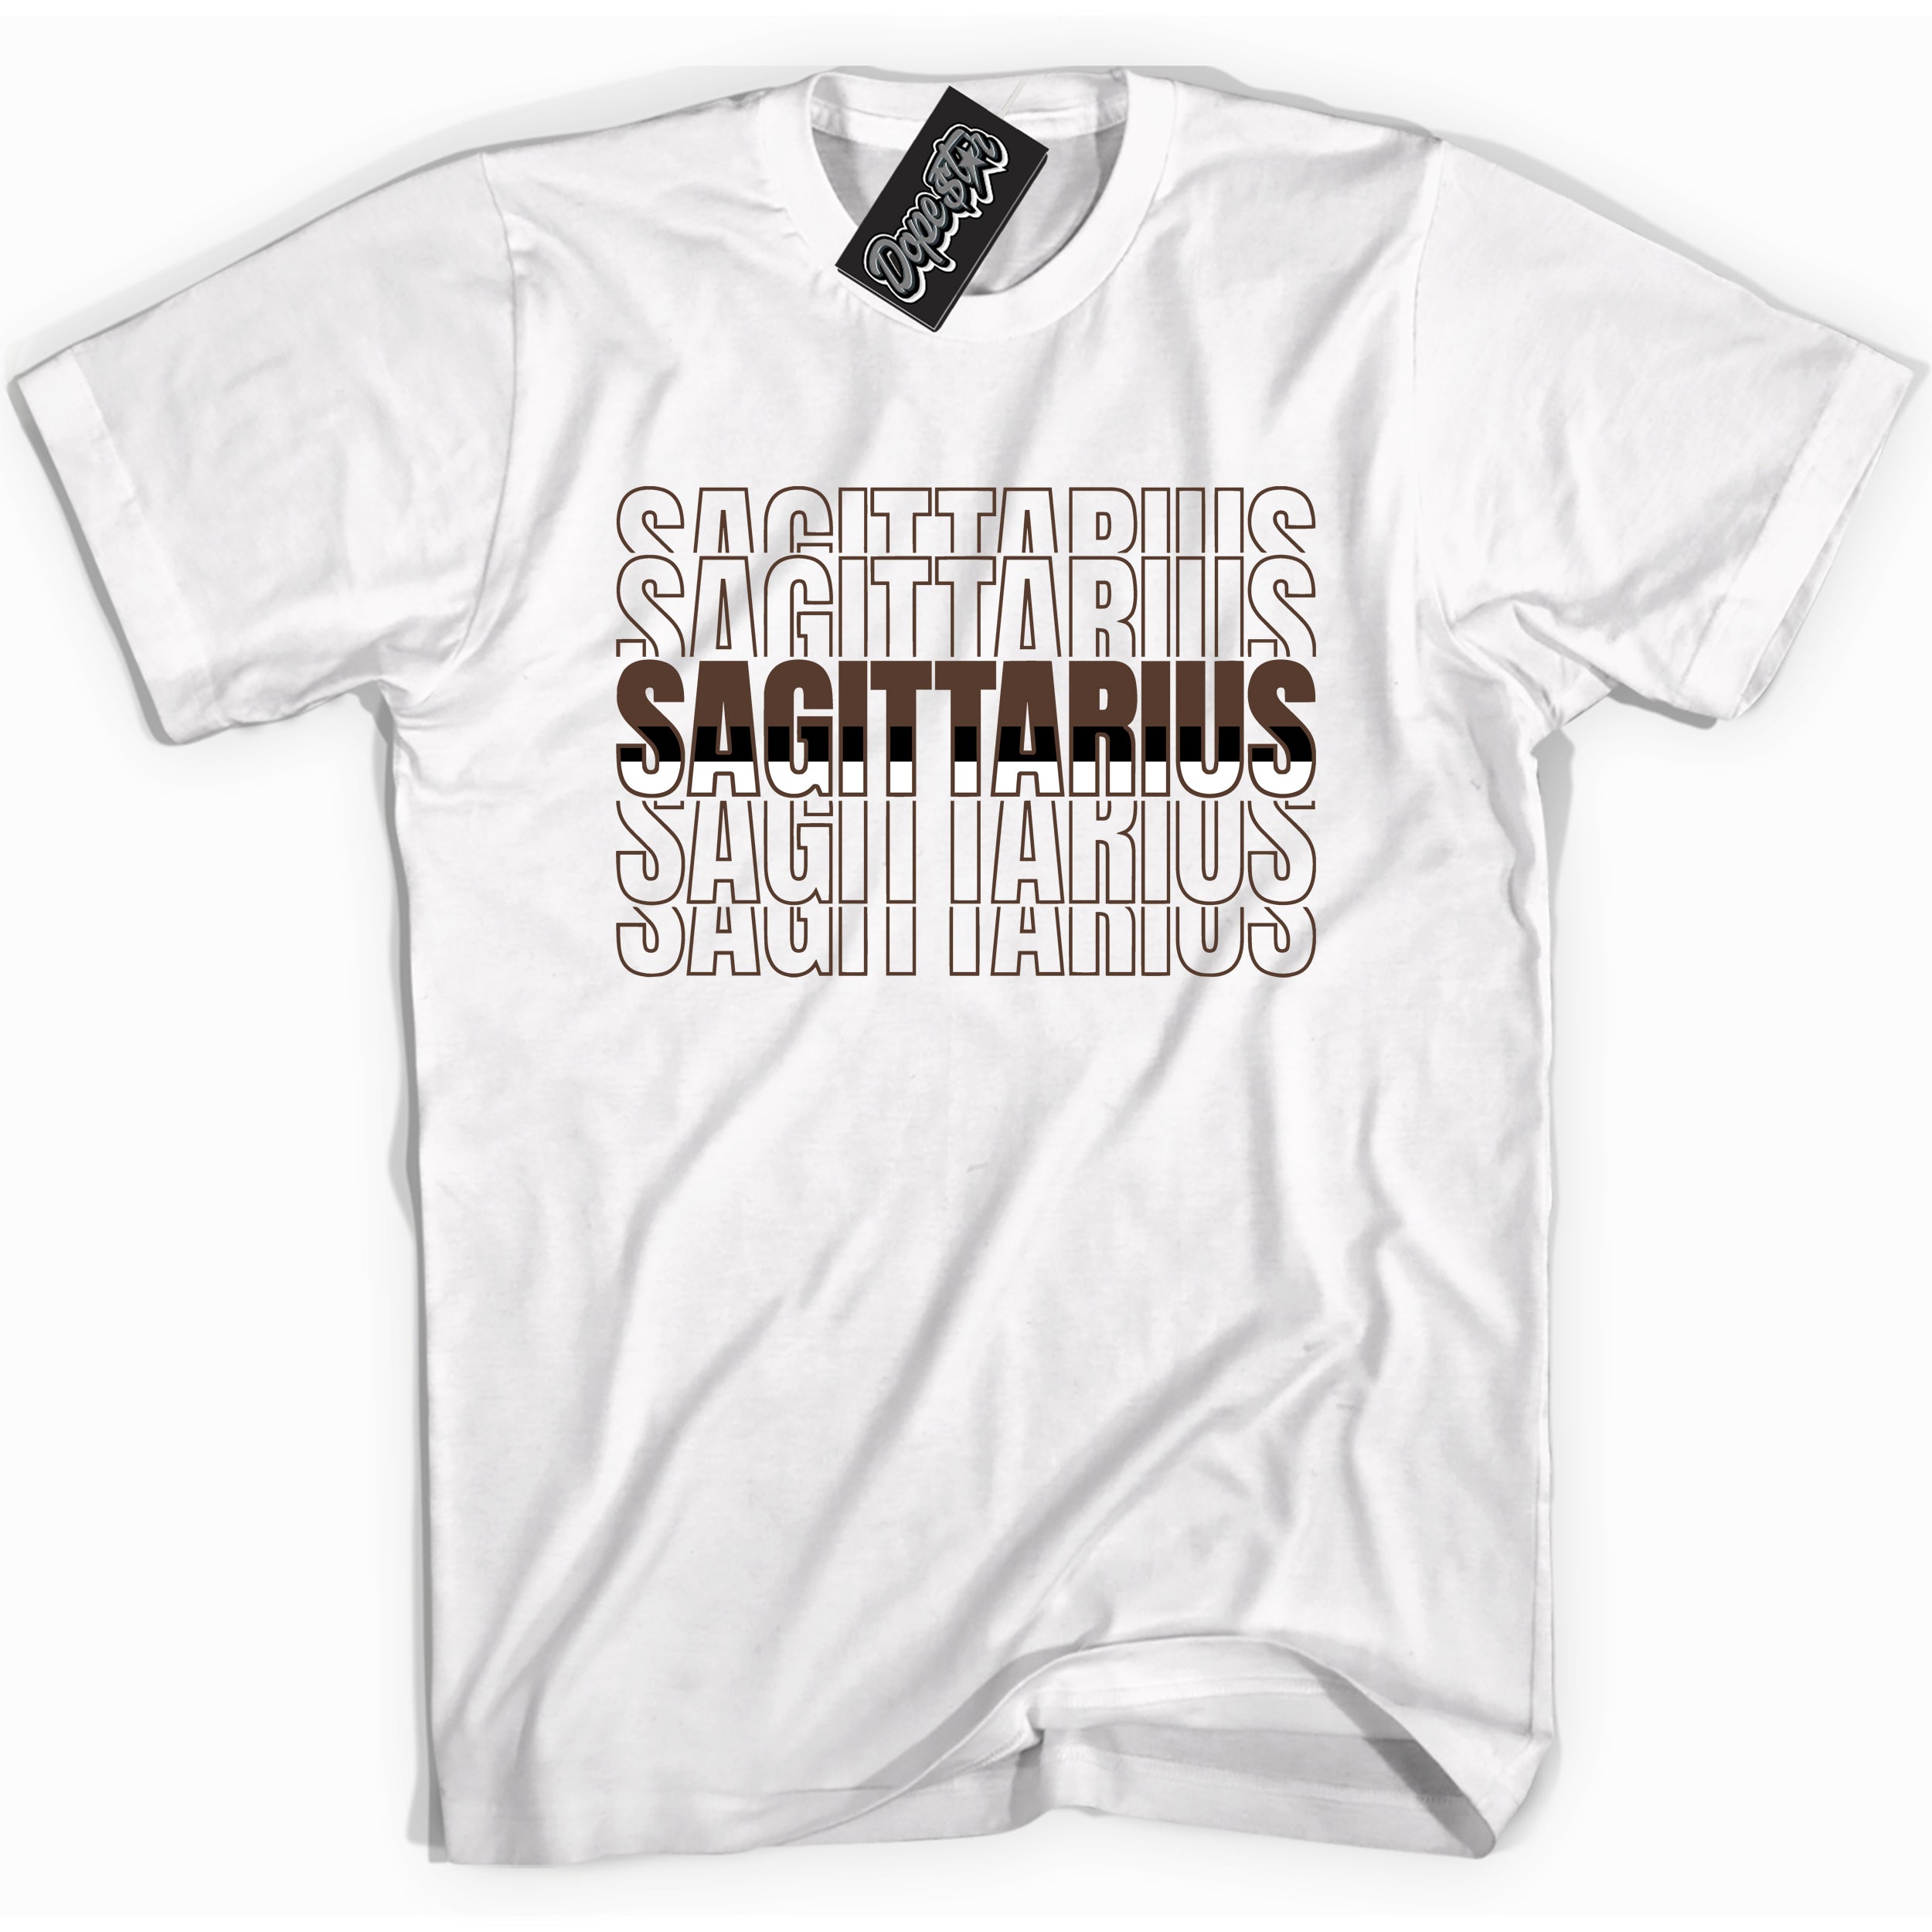 Cool White graphic tee with “ Sagittarius ” design, that perfectly matches Palomino 1s sneakers 